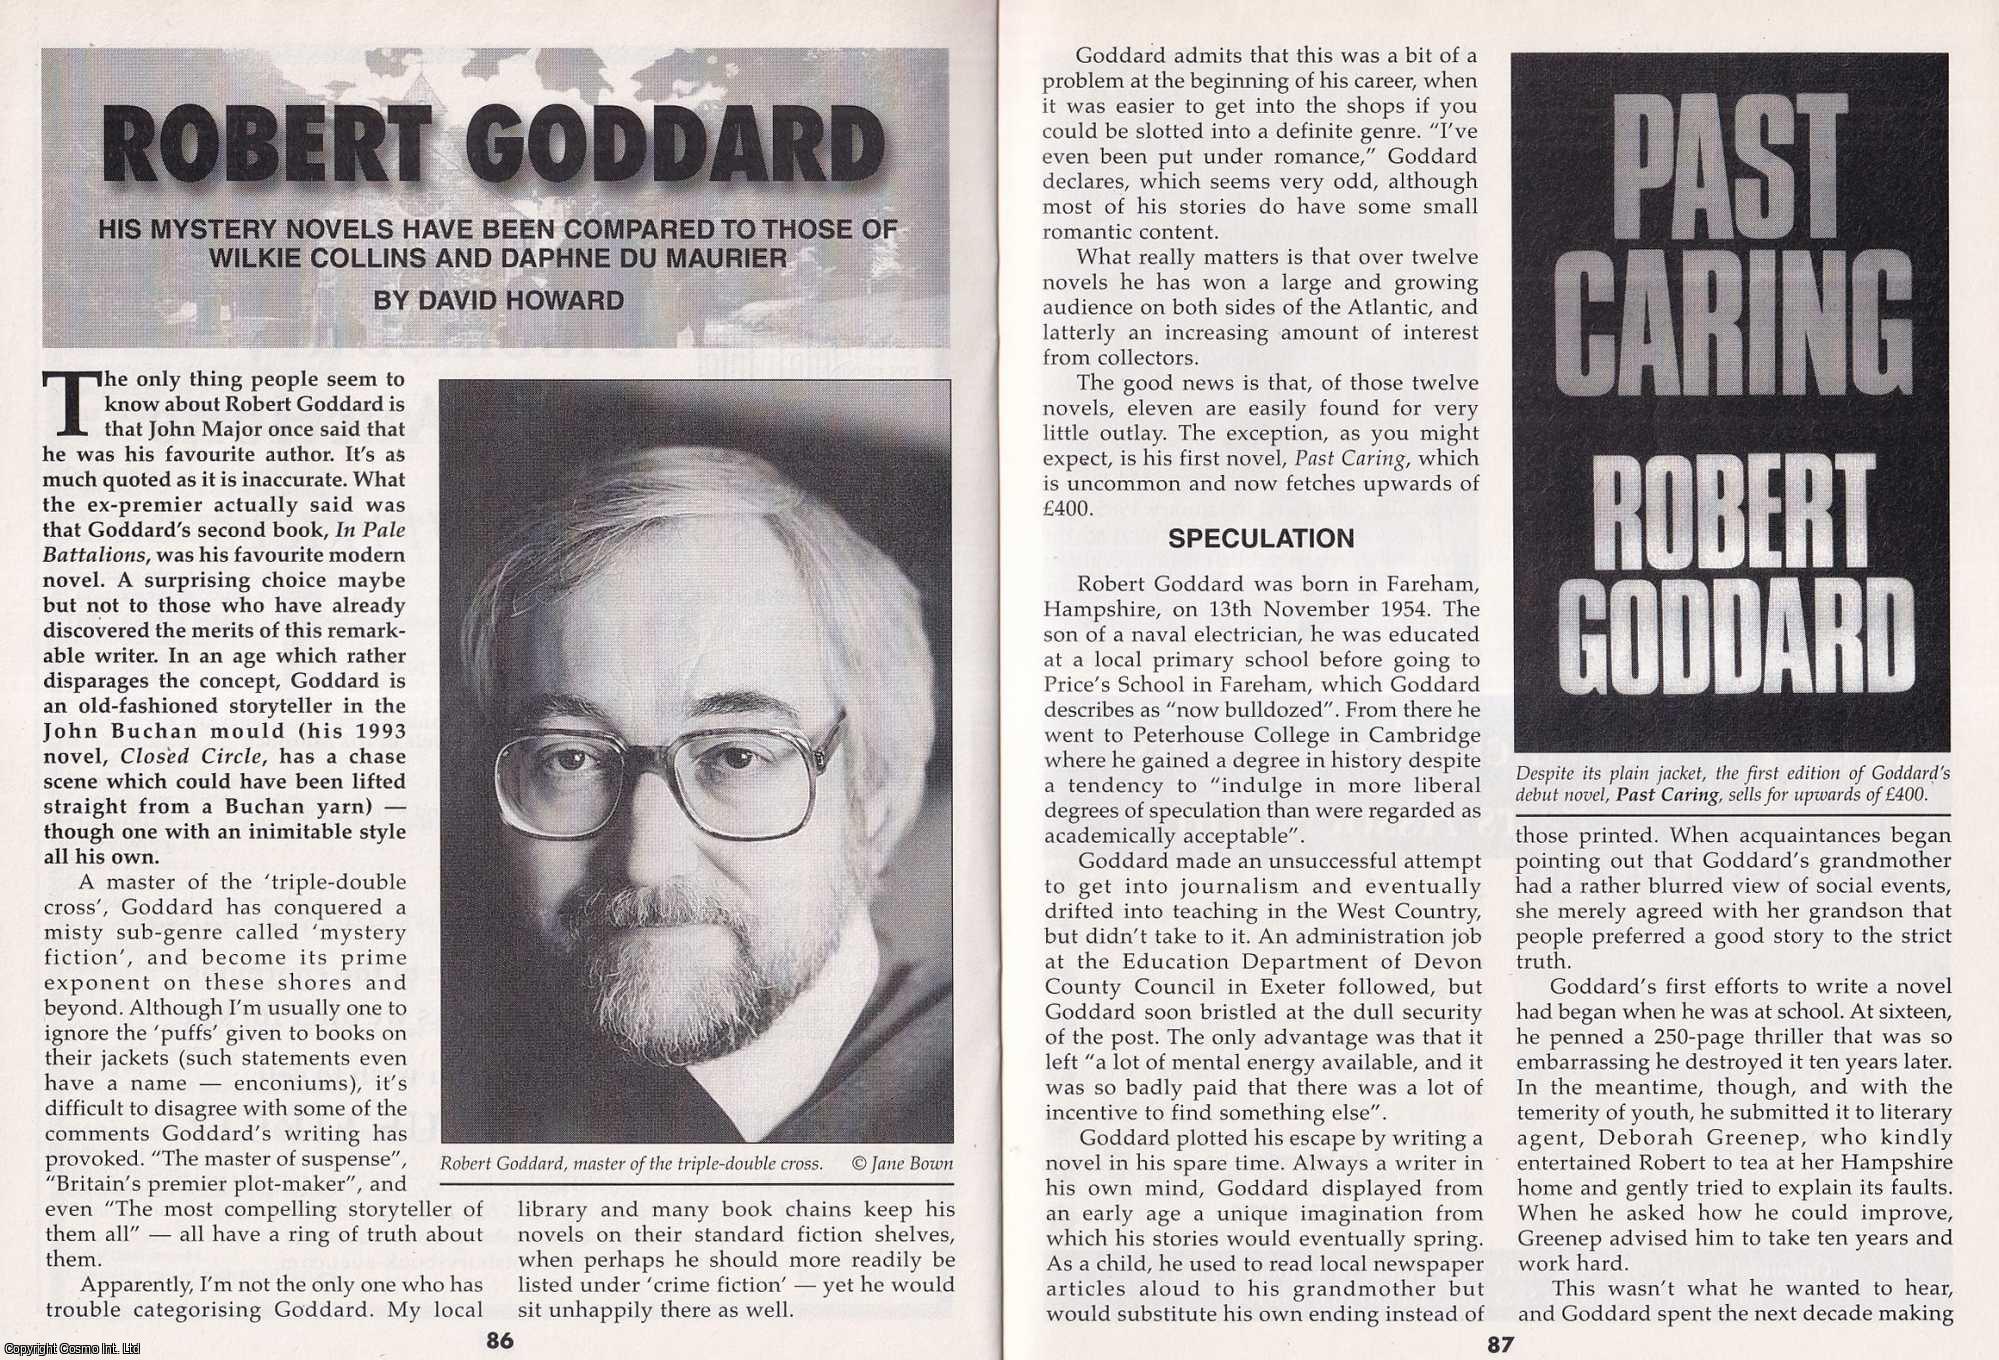 David Howard - Robert Goddard : His Mystery Novels. This is an original article separated from an issue of The Book & Magazine Collector publication, 2000.